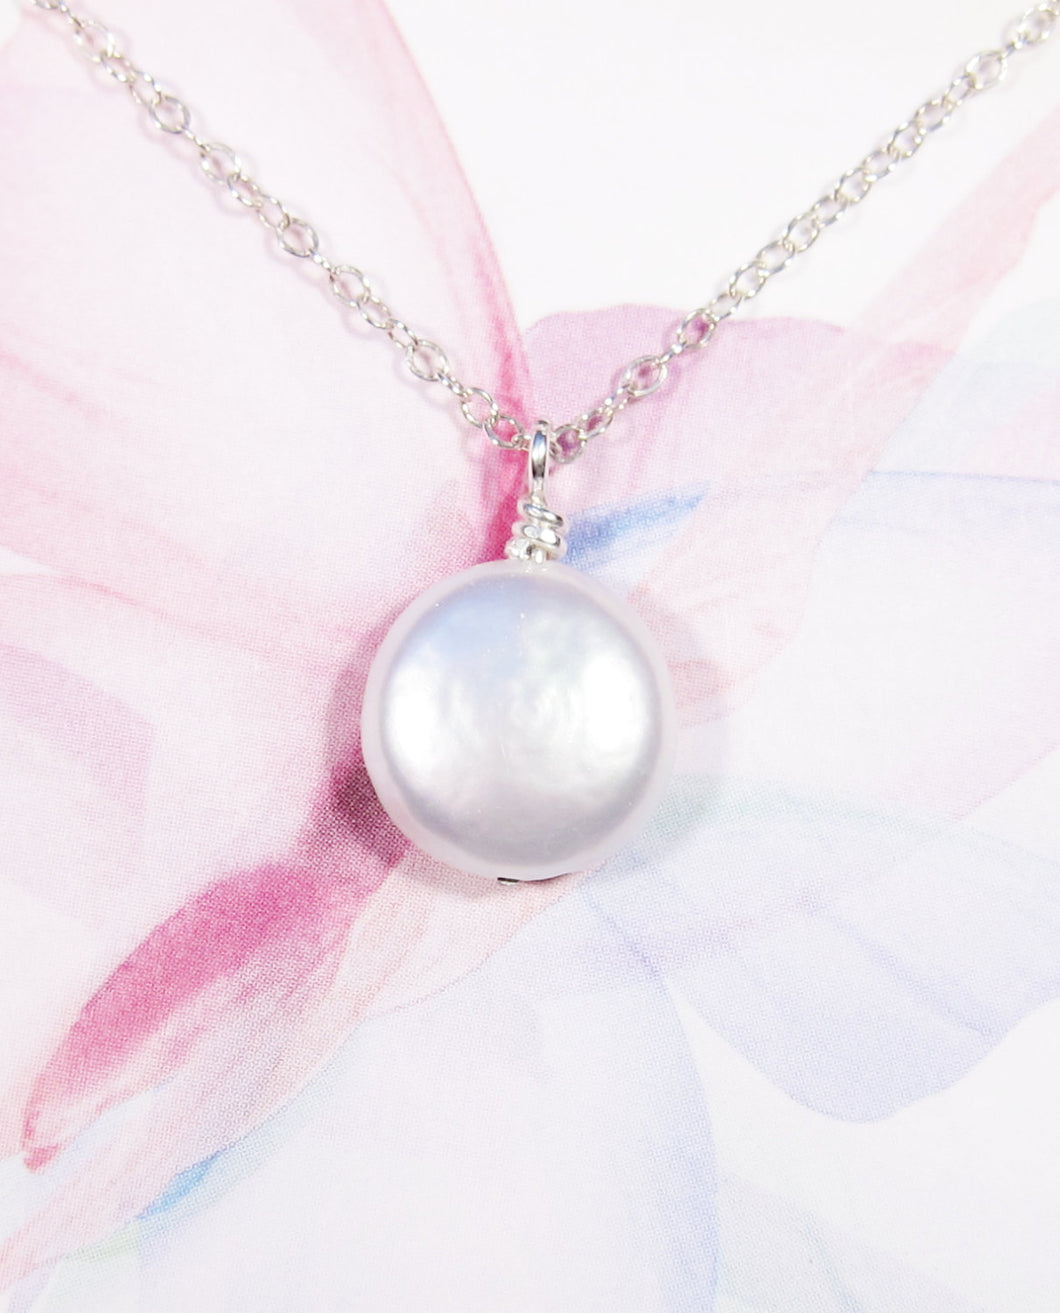 Natural Freshwater Coin Pearl Necklace-Bridesmaid Gift Set of 5,6,7,8,9,10,11,12-Sterling Silver